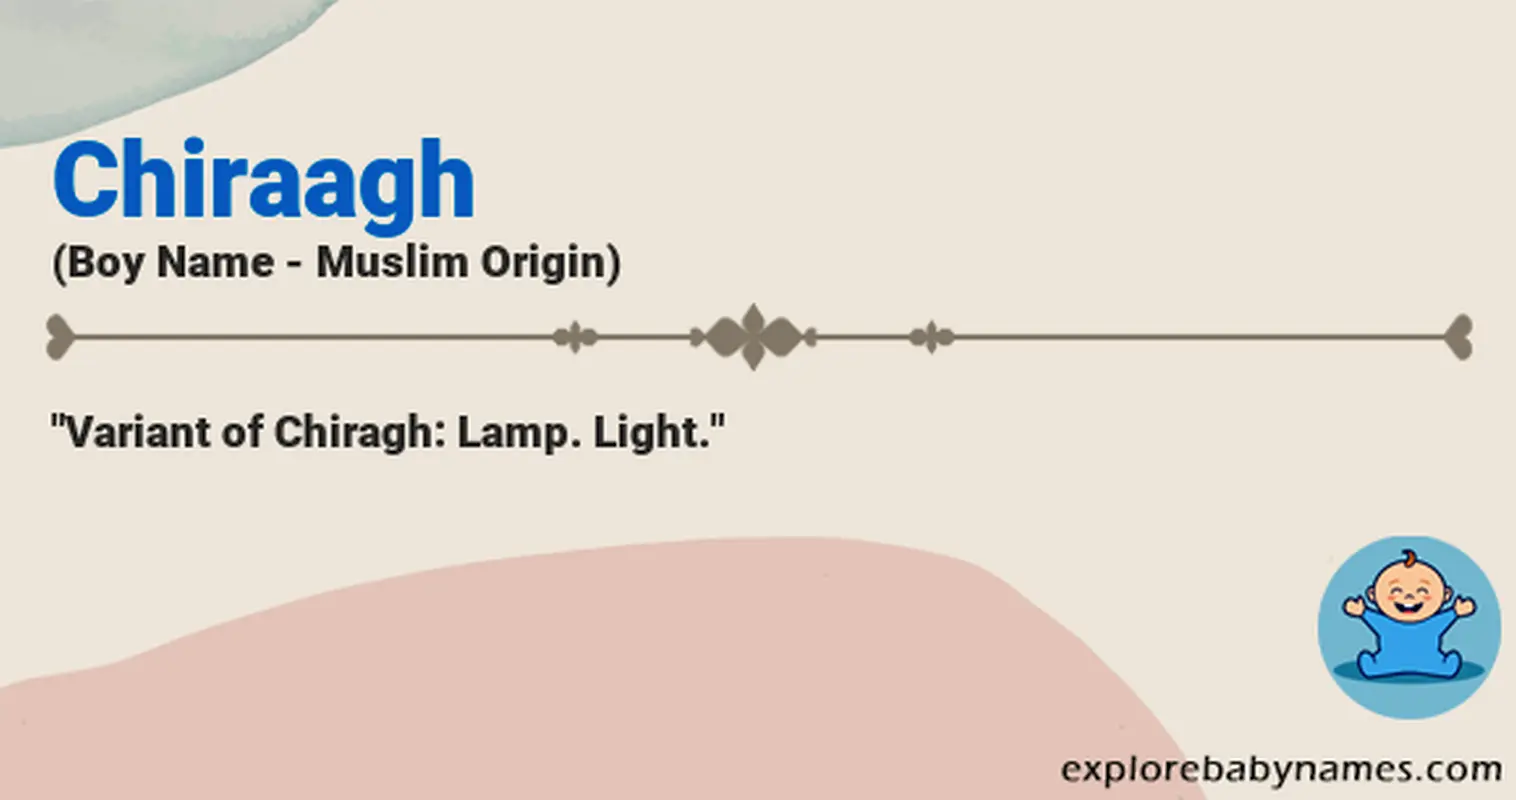 Meaning of Chiraagh